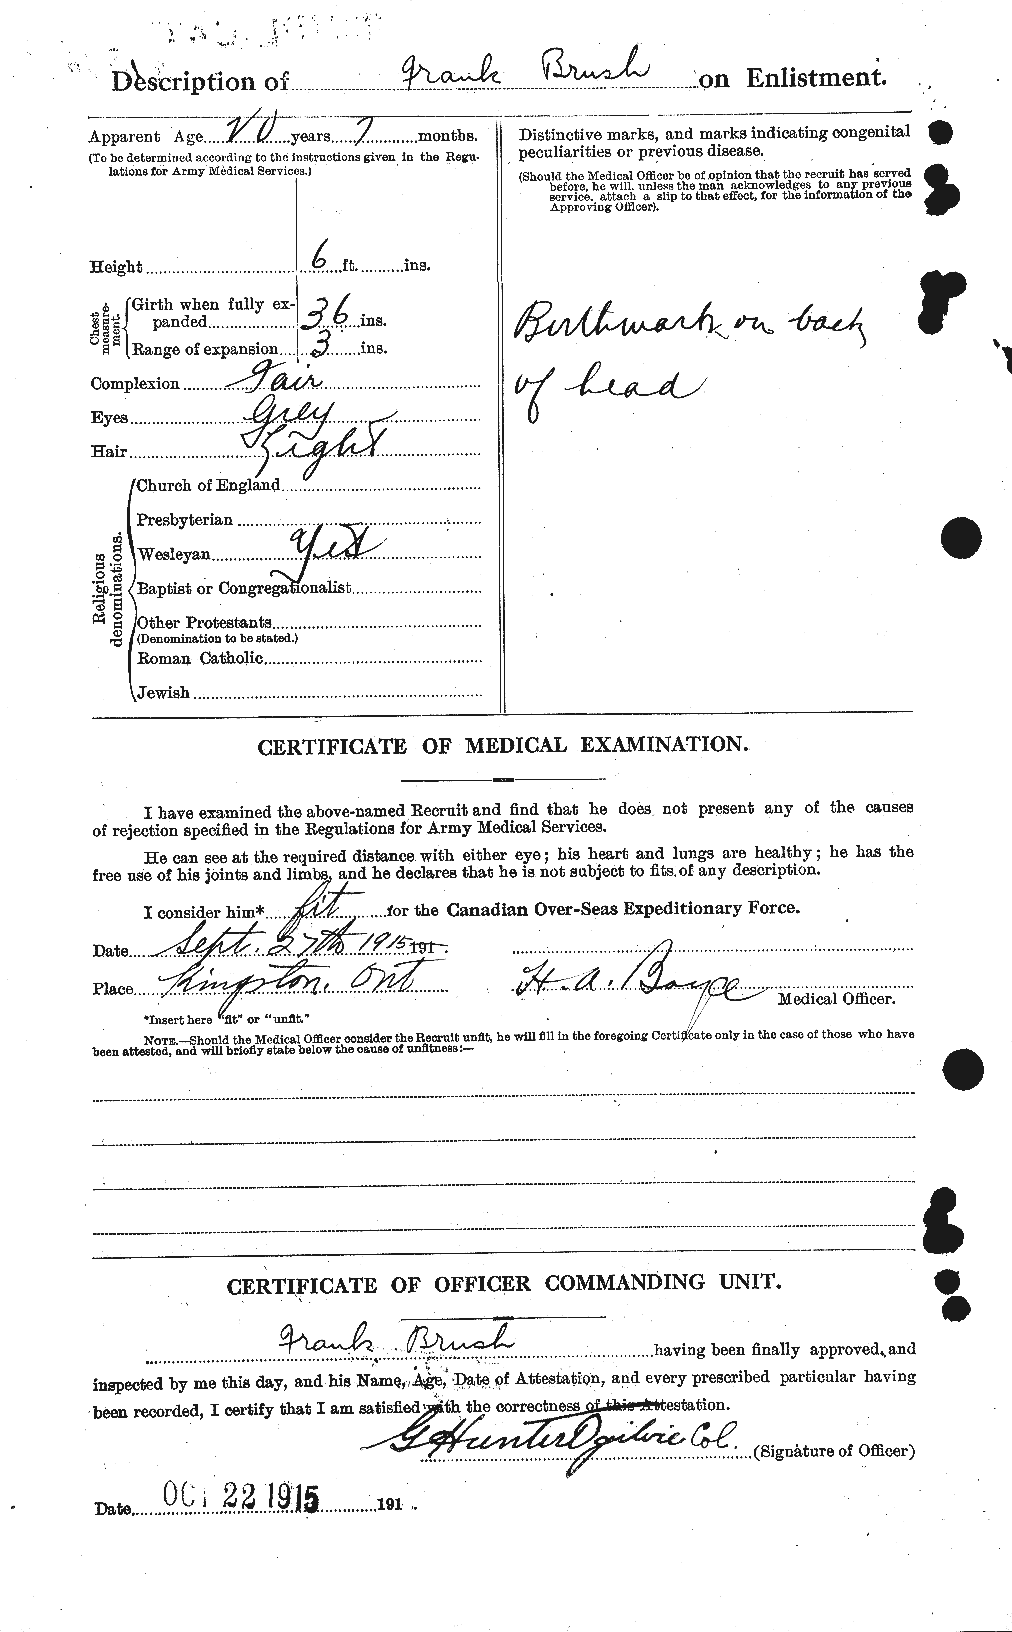 Personnel Records of the First World War - CEF 270073b